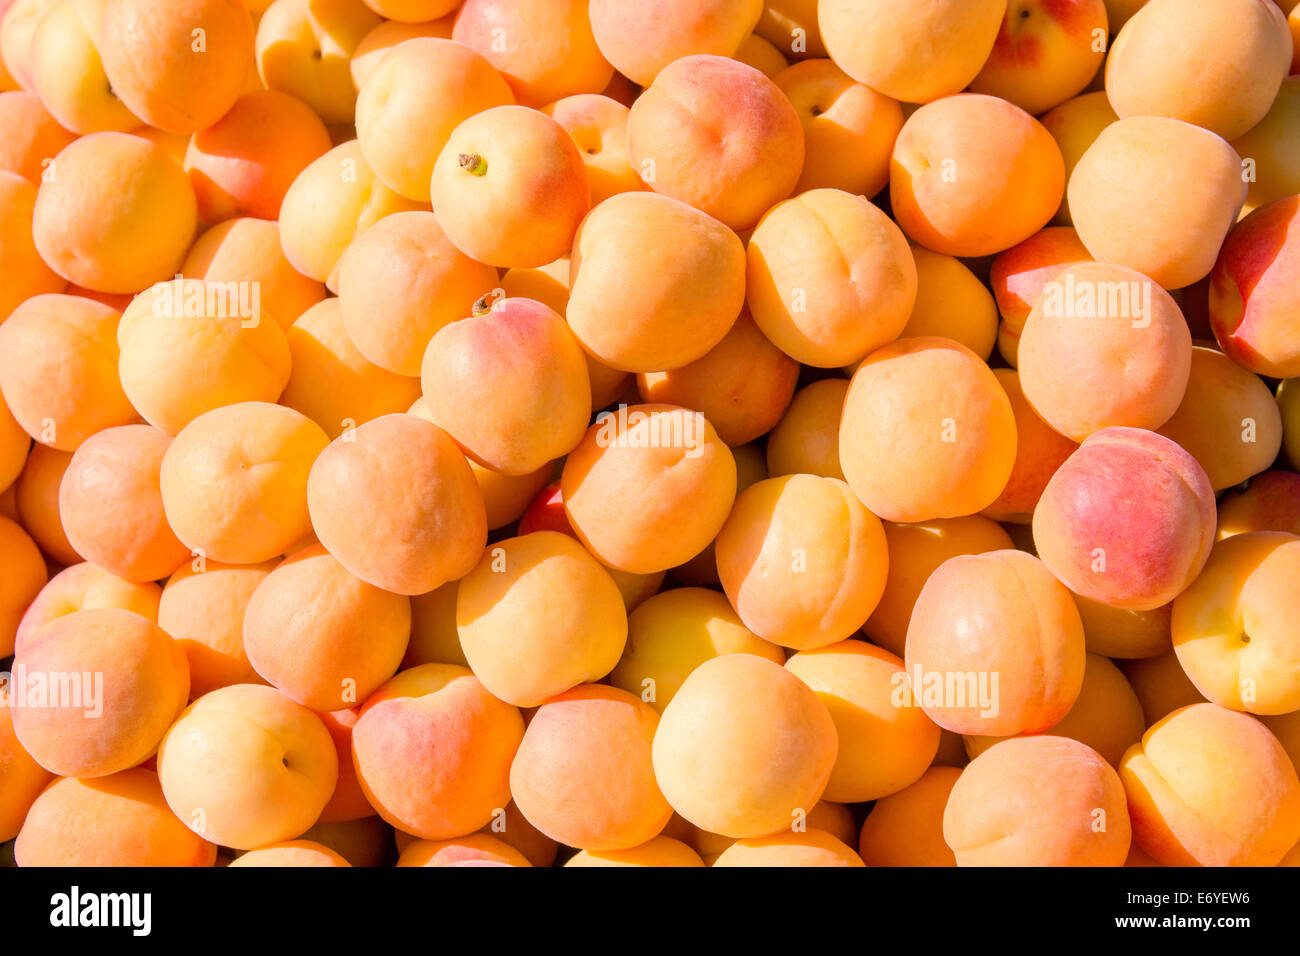 A pile of yellow and orange apricots on display for sale in the area market Stock Photo